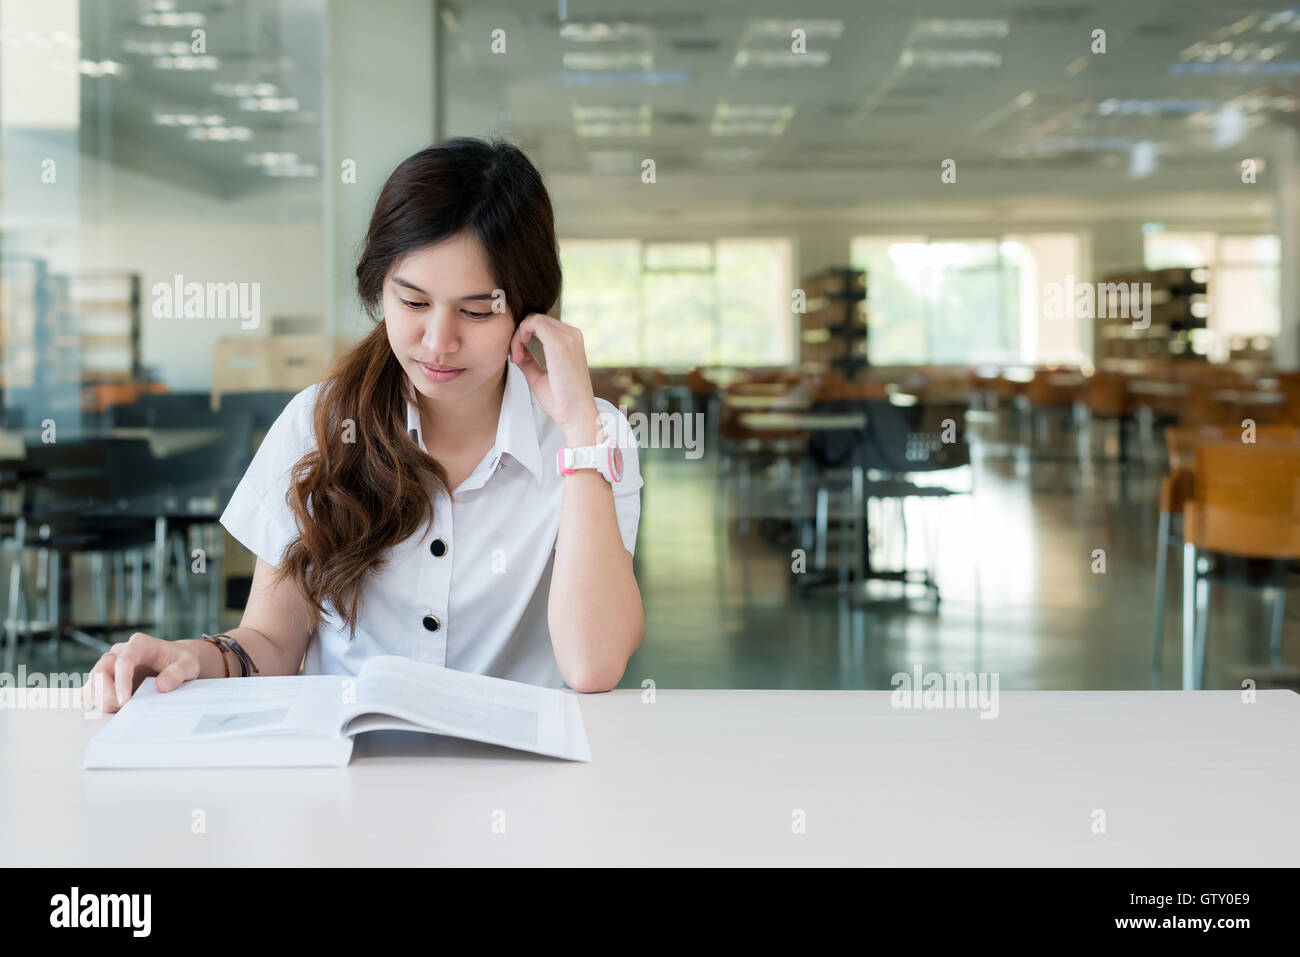 Asian student in uniform reading book for learning in classroom at university.One Asian student. Stock Photo